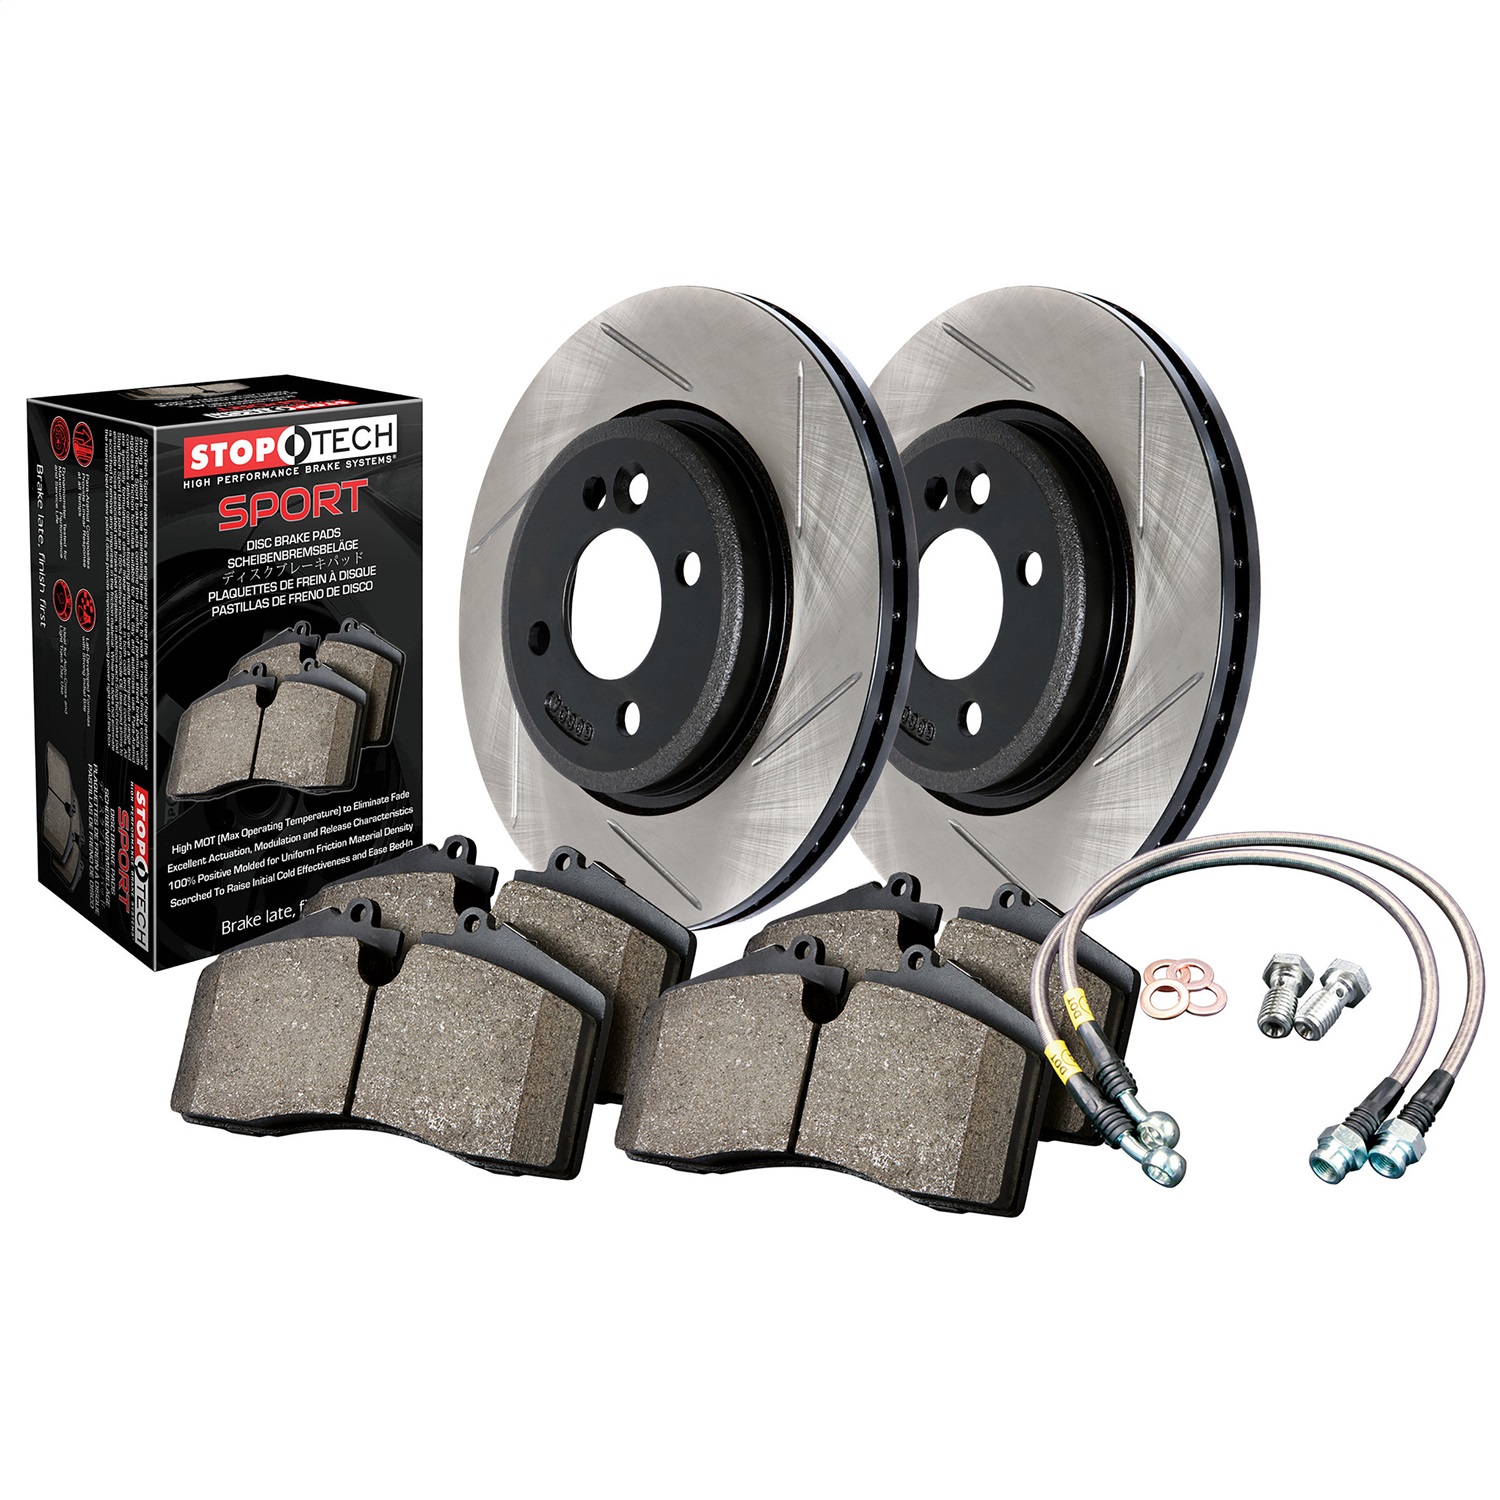 StopTech 977.34002F Sport Disc Brake Kit w/Slotted Rotors